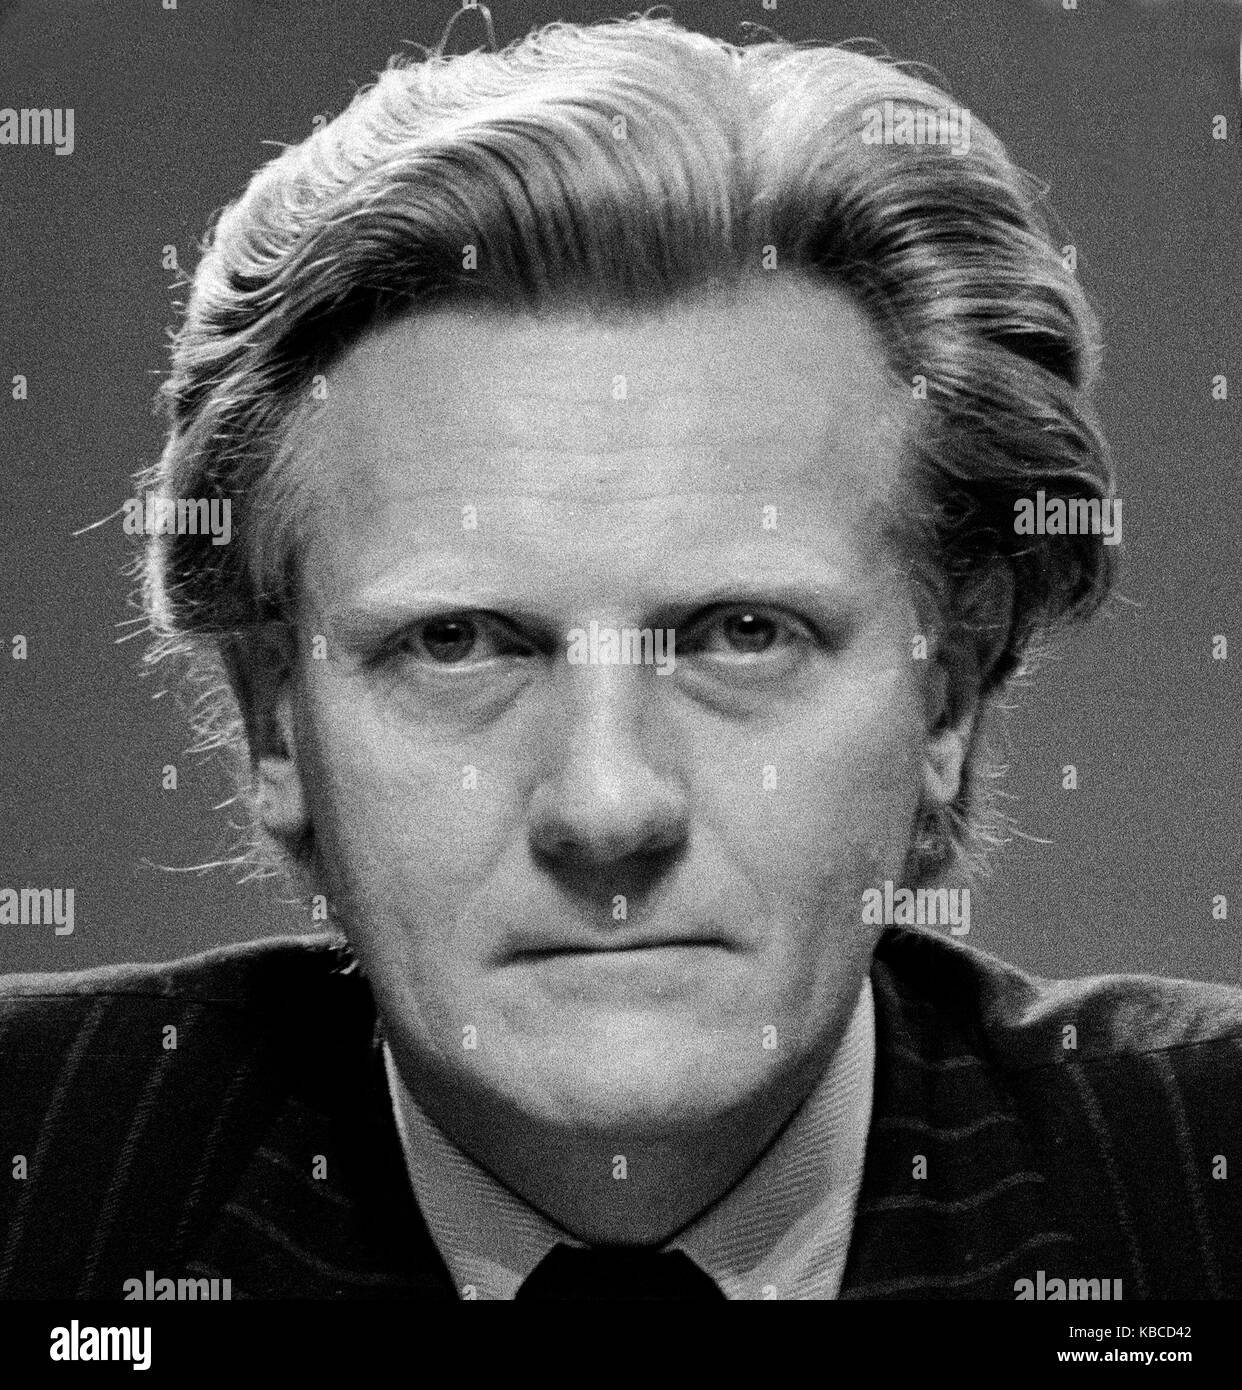 Michael Ray Dibdin Heseltine, Baron Heseltine, CH, PC is a British Conservative politician and businessman. After initially making money as a property developer, he was one of the founders of the publishing house Haymarket. Exclusive image David Cole - Archives Press Portrait Service 1990 Stock Photo